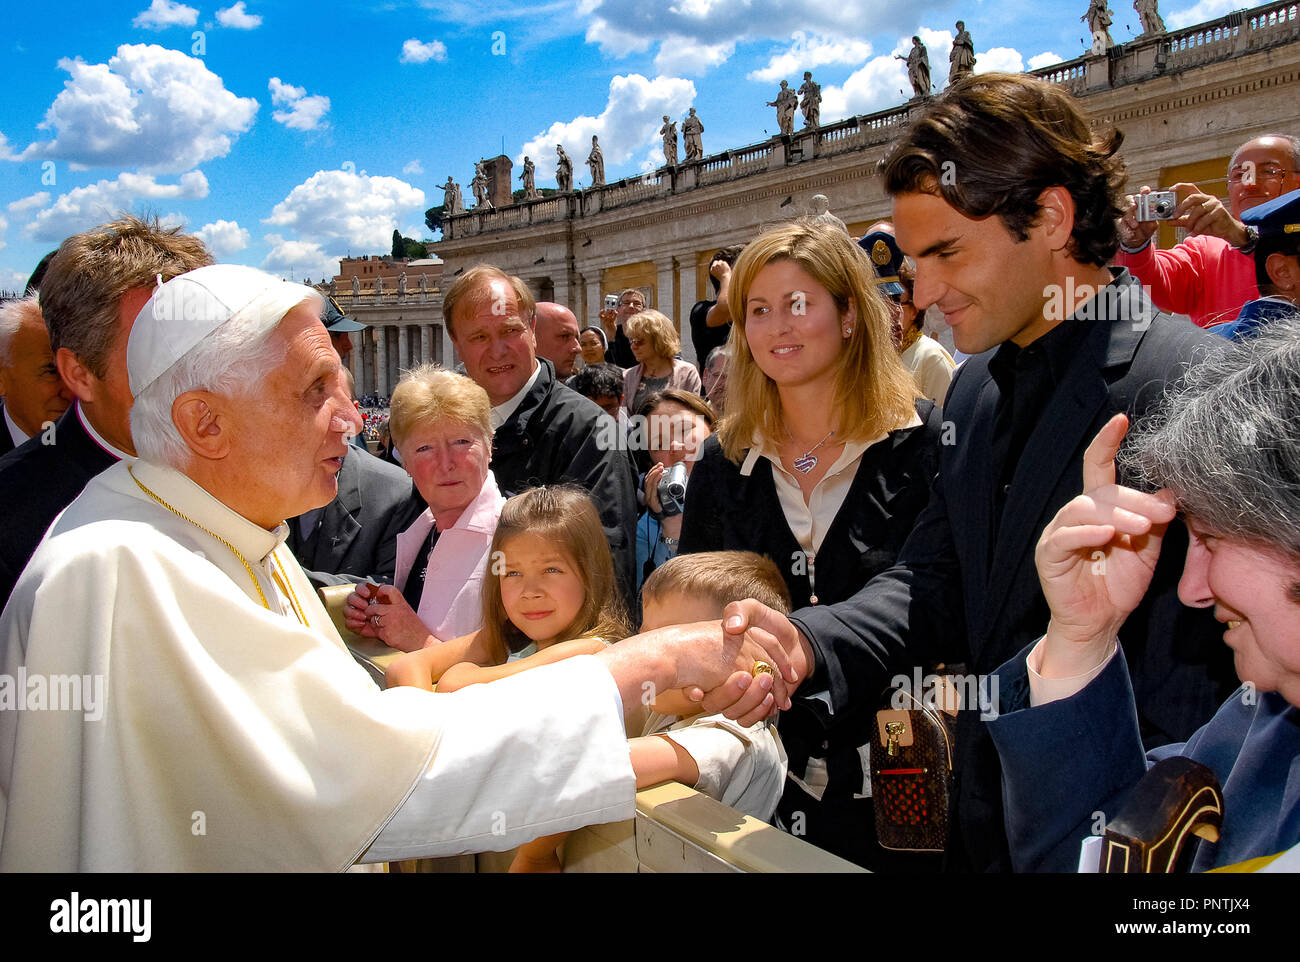 Pope benedict XVI general audience with Roger Federer tennis player - 10/05/2016 Stock Photo